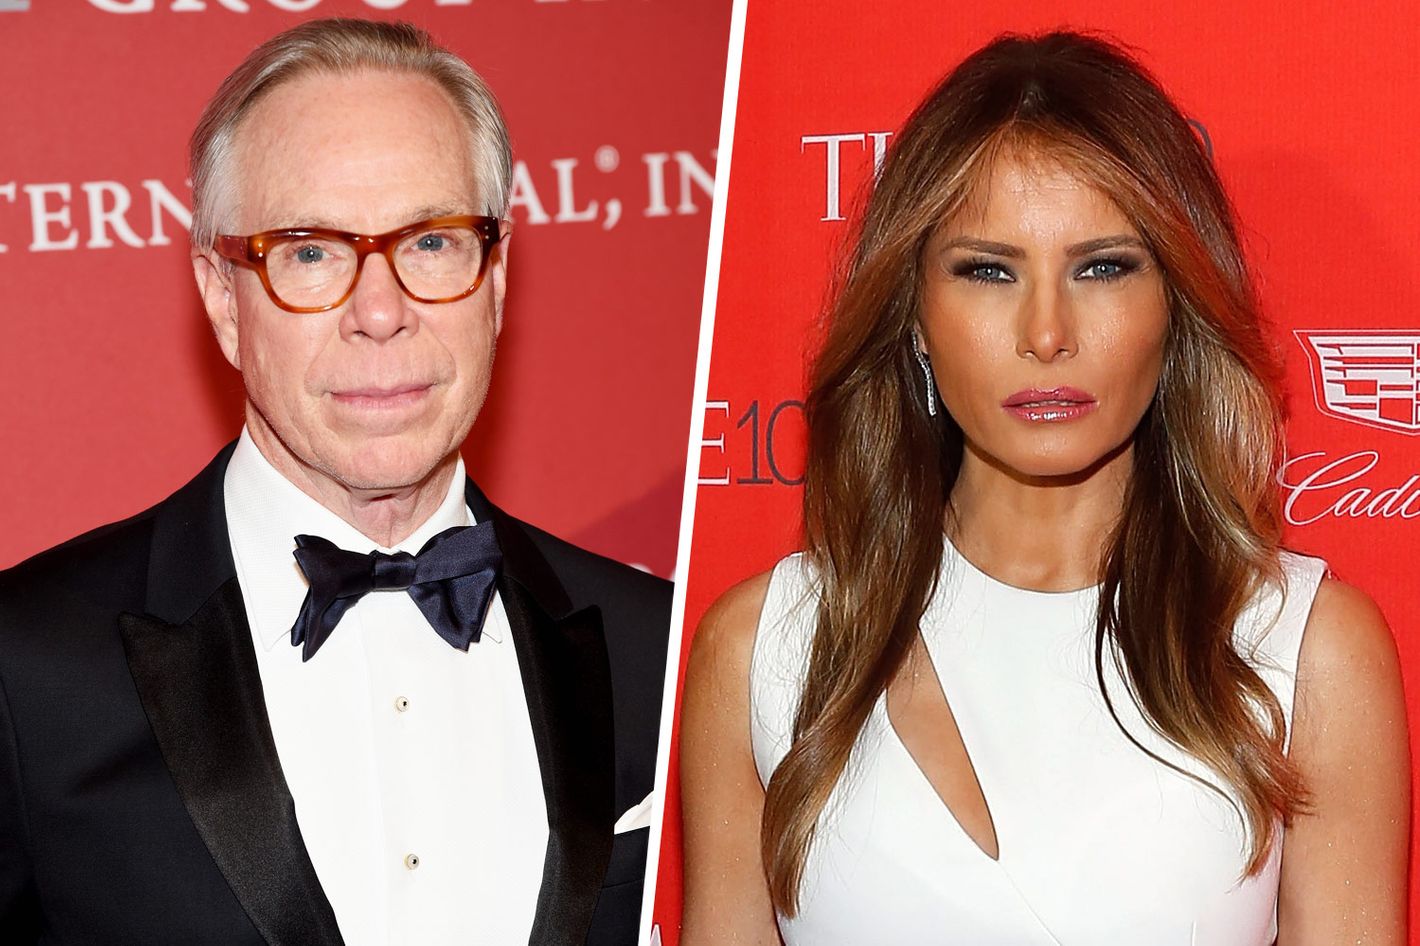 Tommy Hilfiger Comments on Dressing Melania